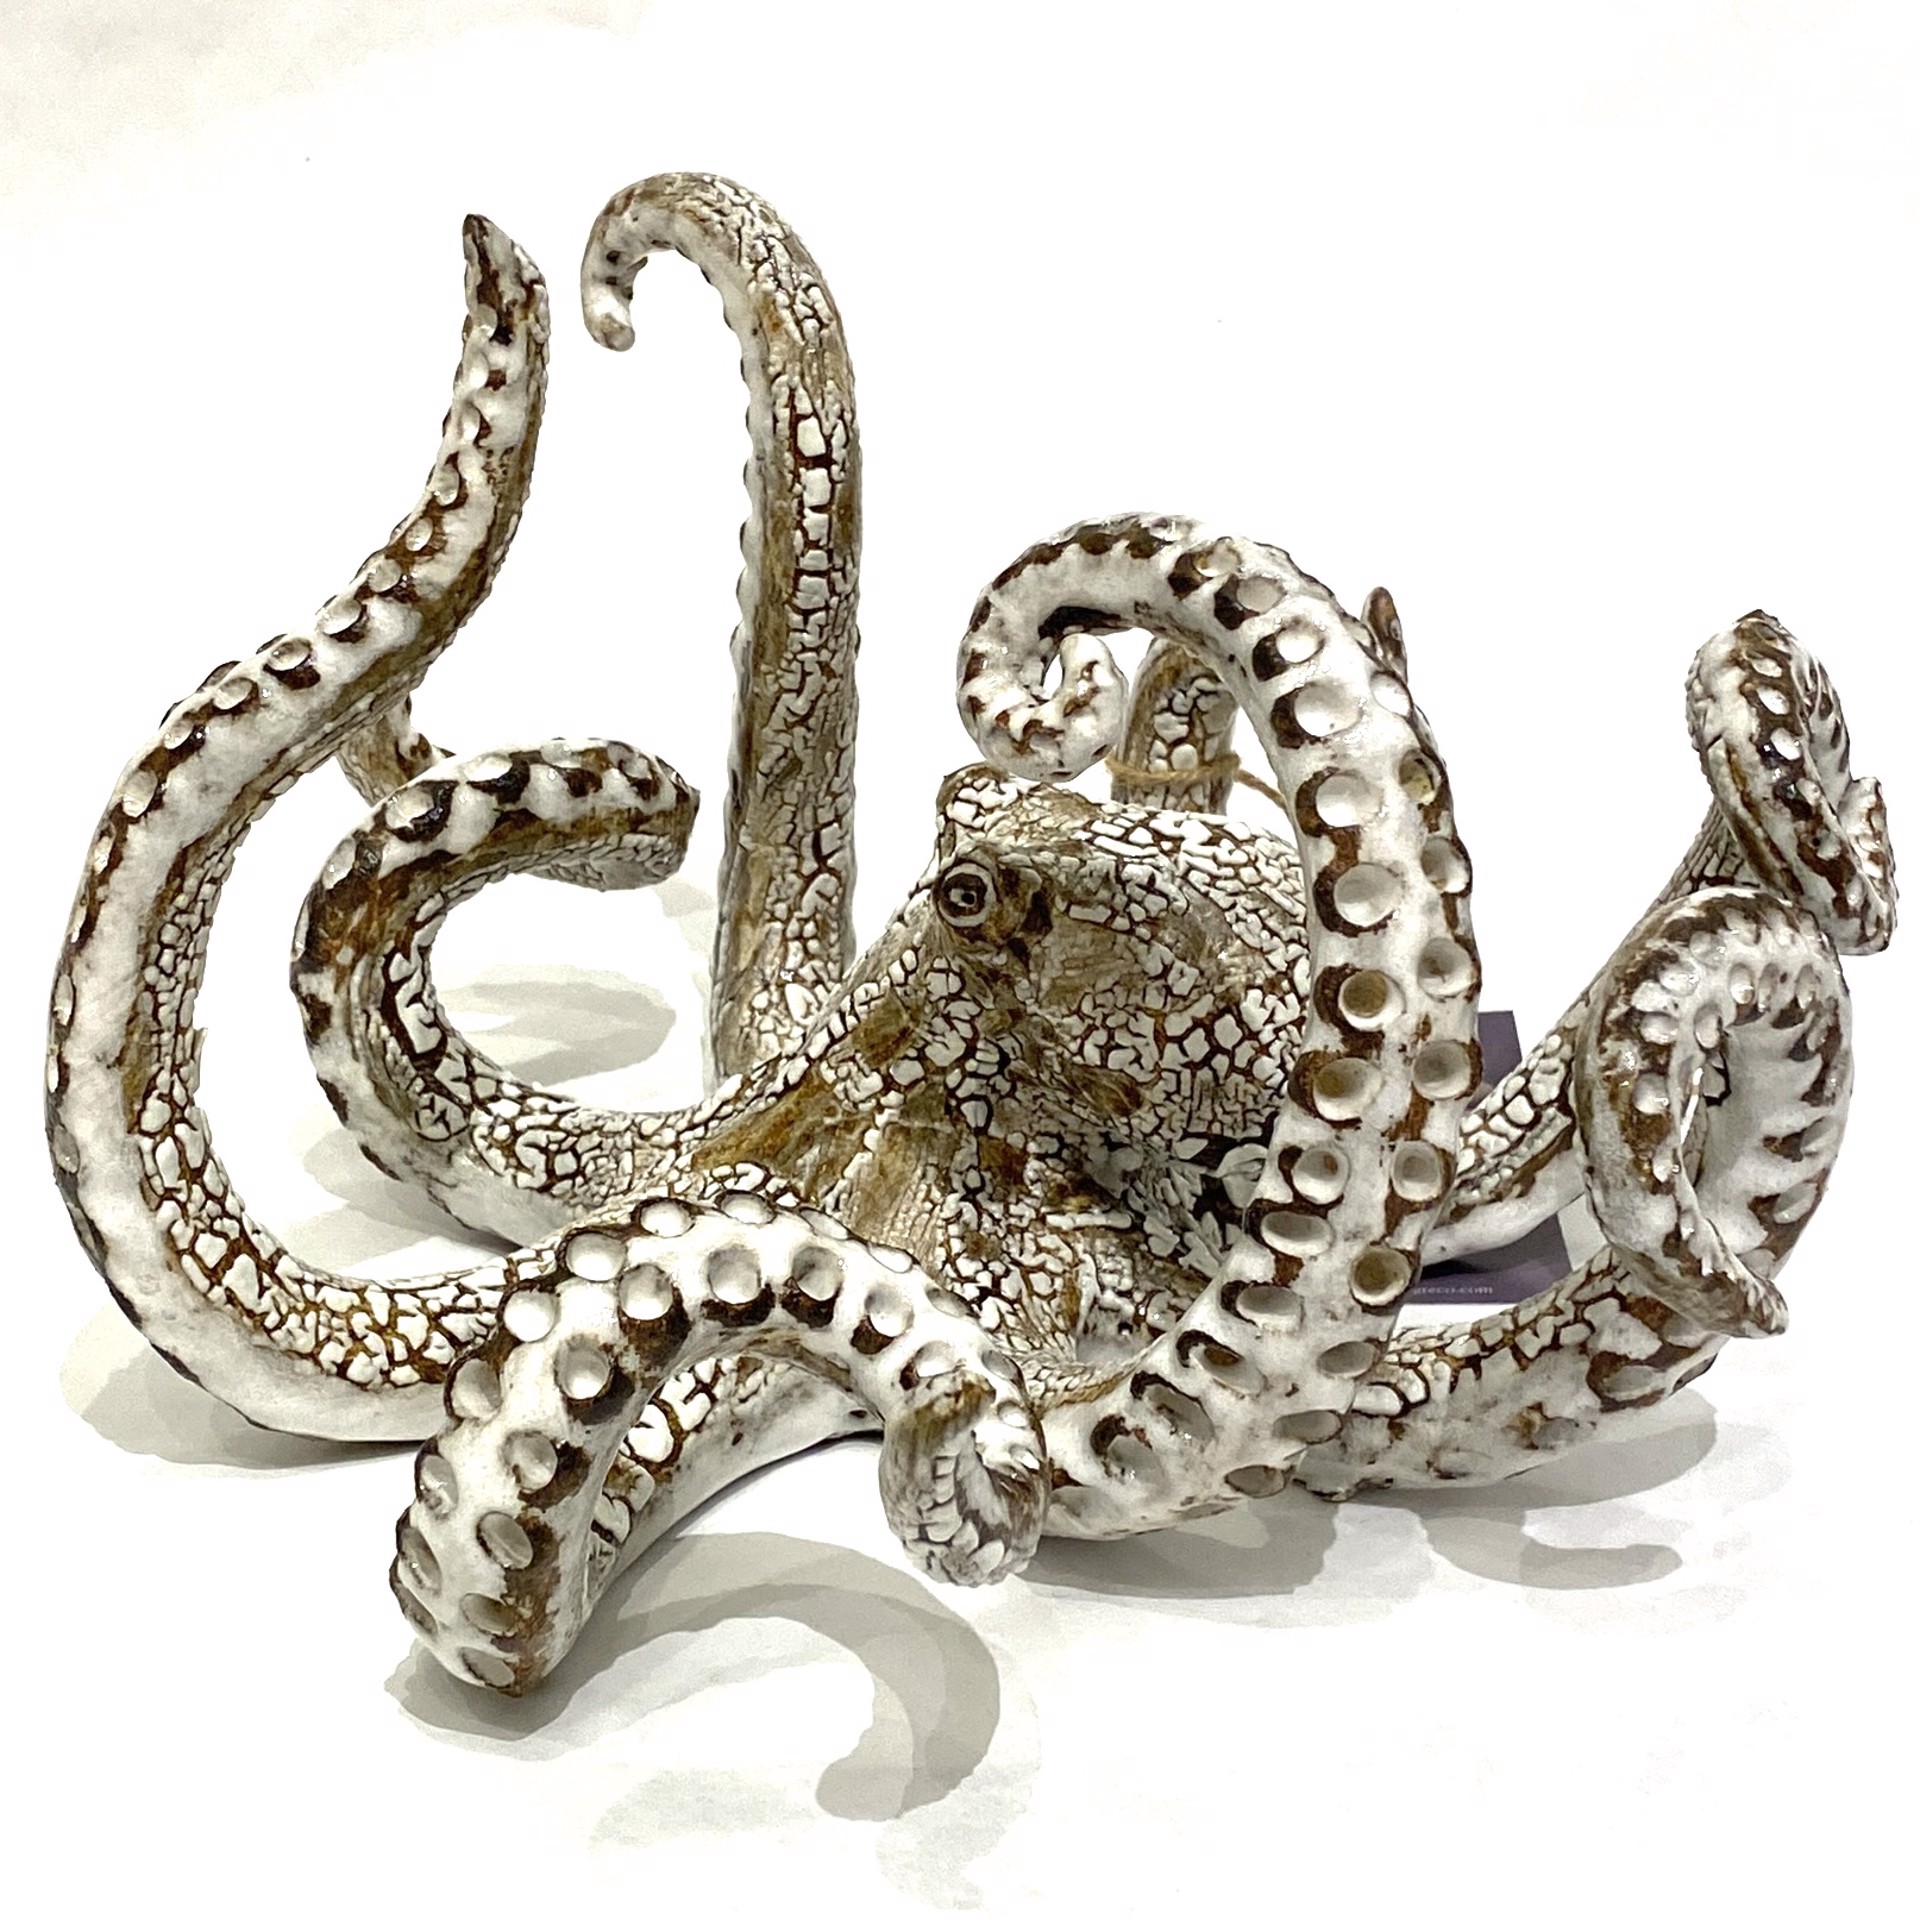 Small Table Octopus by Shayne Greco